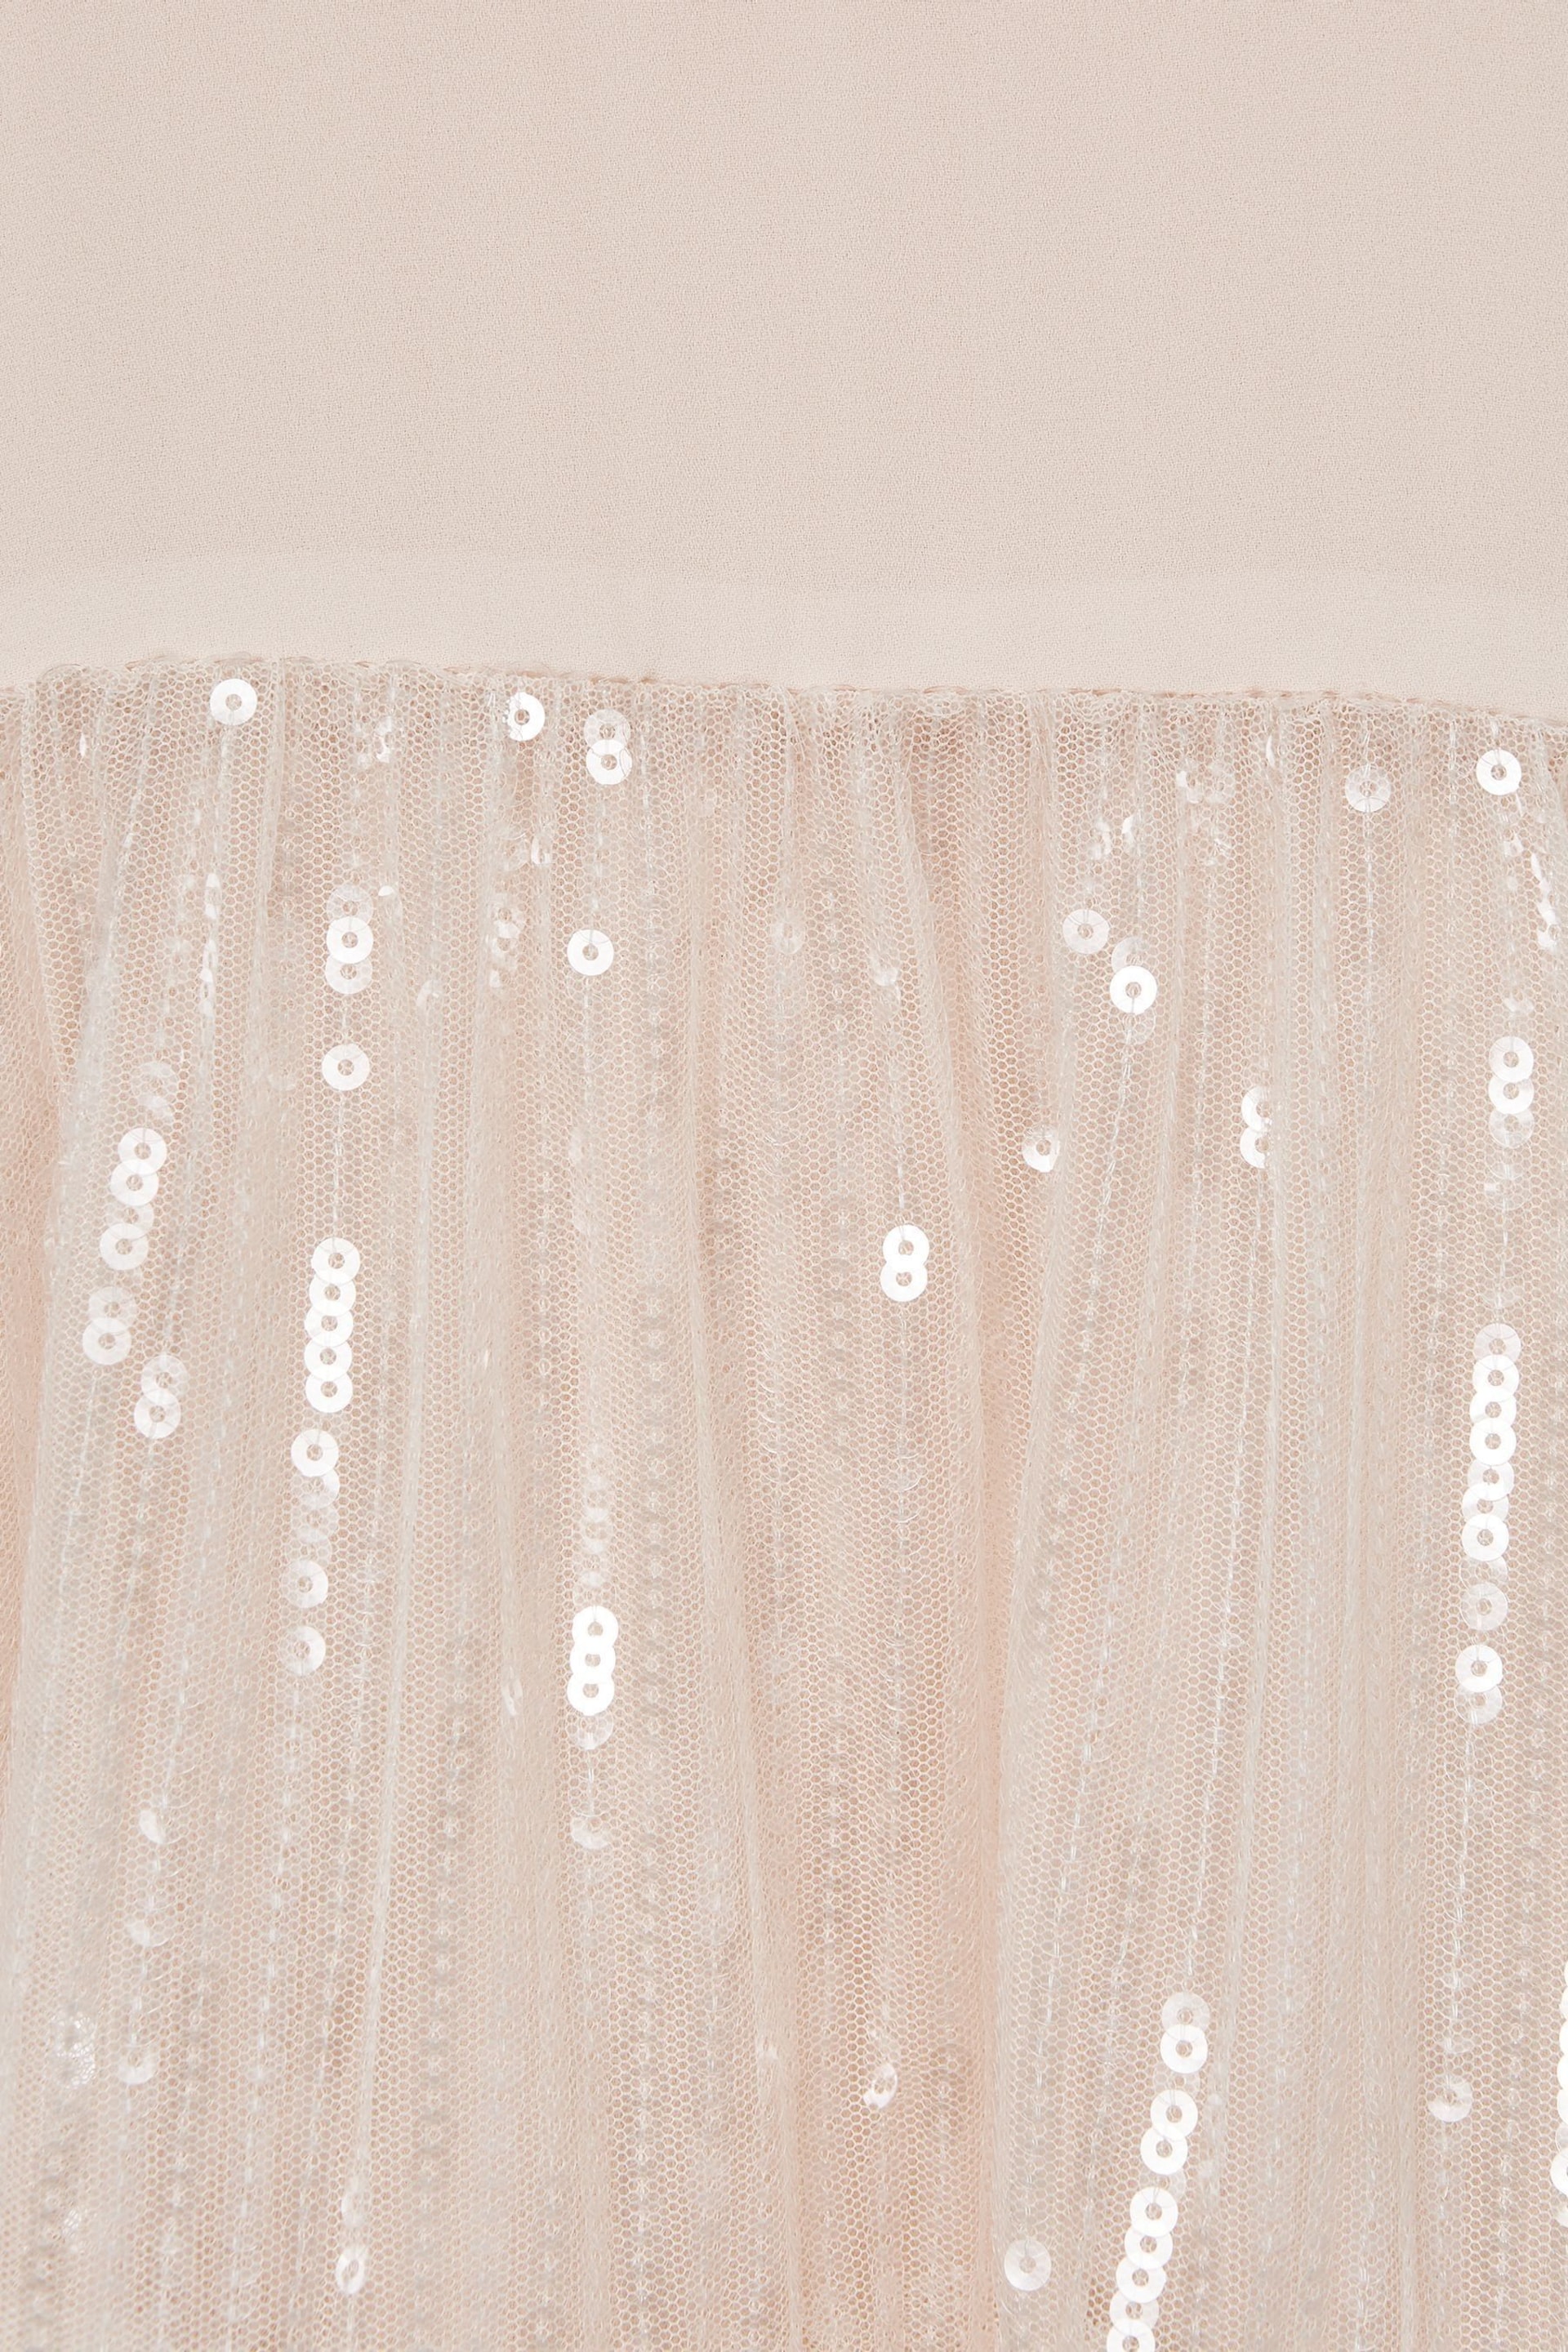 Reiss Pale Pink Luci Senior Sequin Tiered Dress - Image 6 of 6